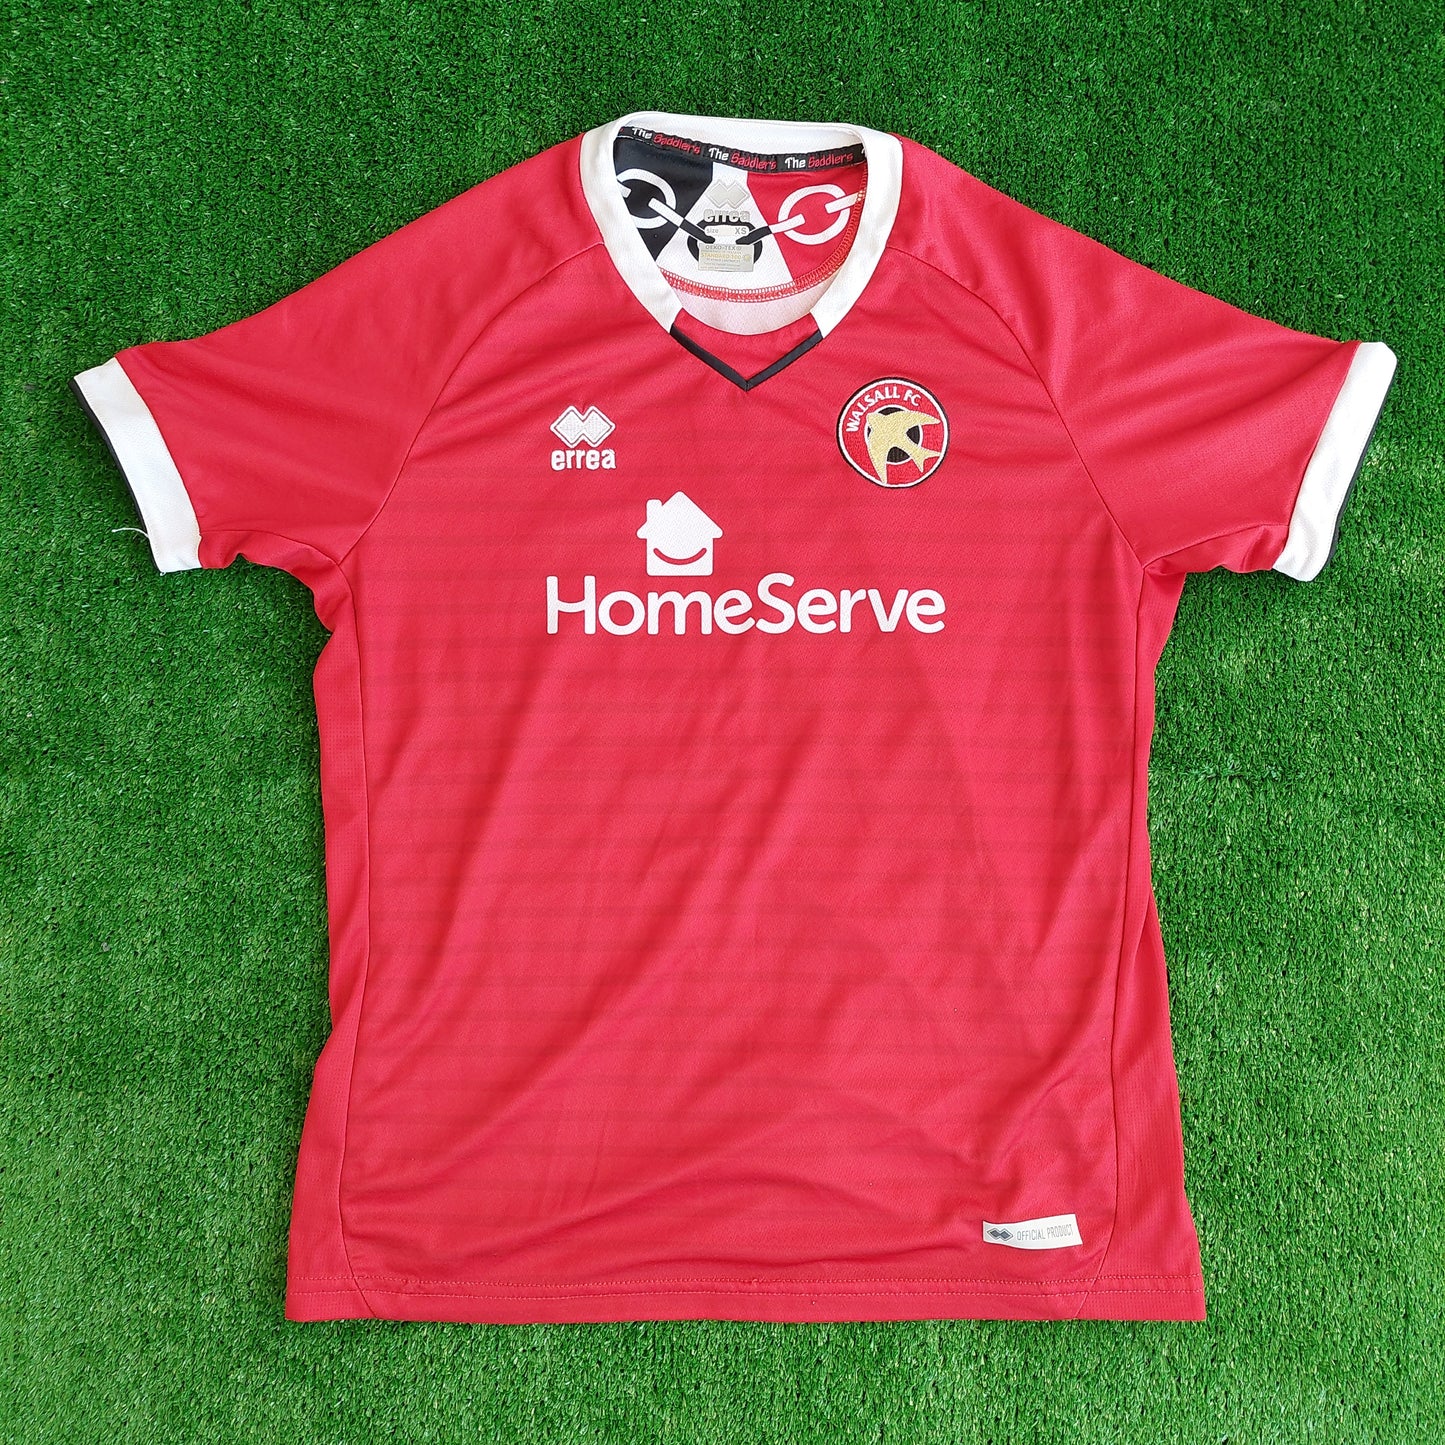 Walsall 2019/20 Home Shirt (Excellent) - Size XS